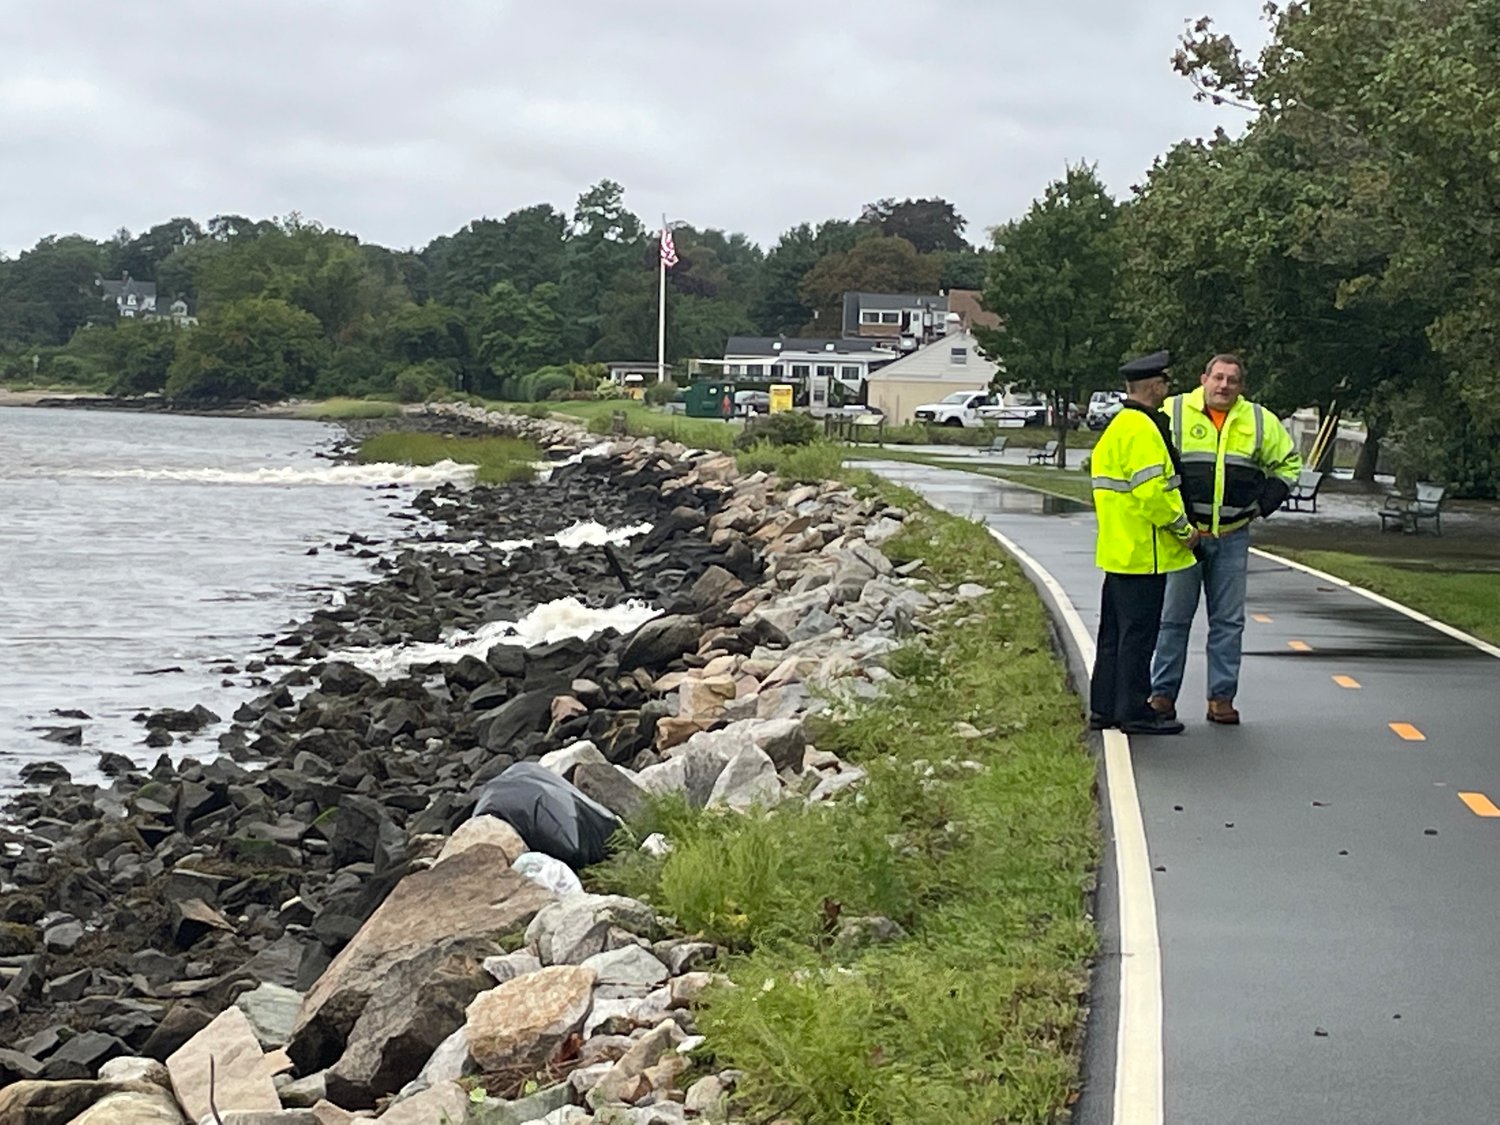 Brian Burke of the Bristol Police Department and John Olson of the RI Department of Transportation, survey the flooded area at Hope and Washington Streets. On the shoreline, floodwaters jet into Bristol Harbor from three separate pipes.